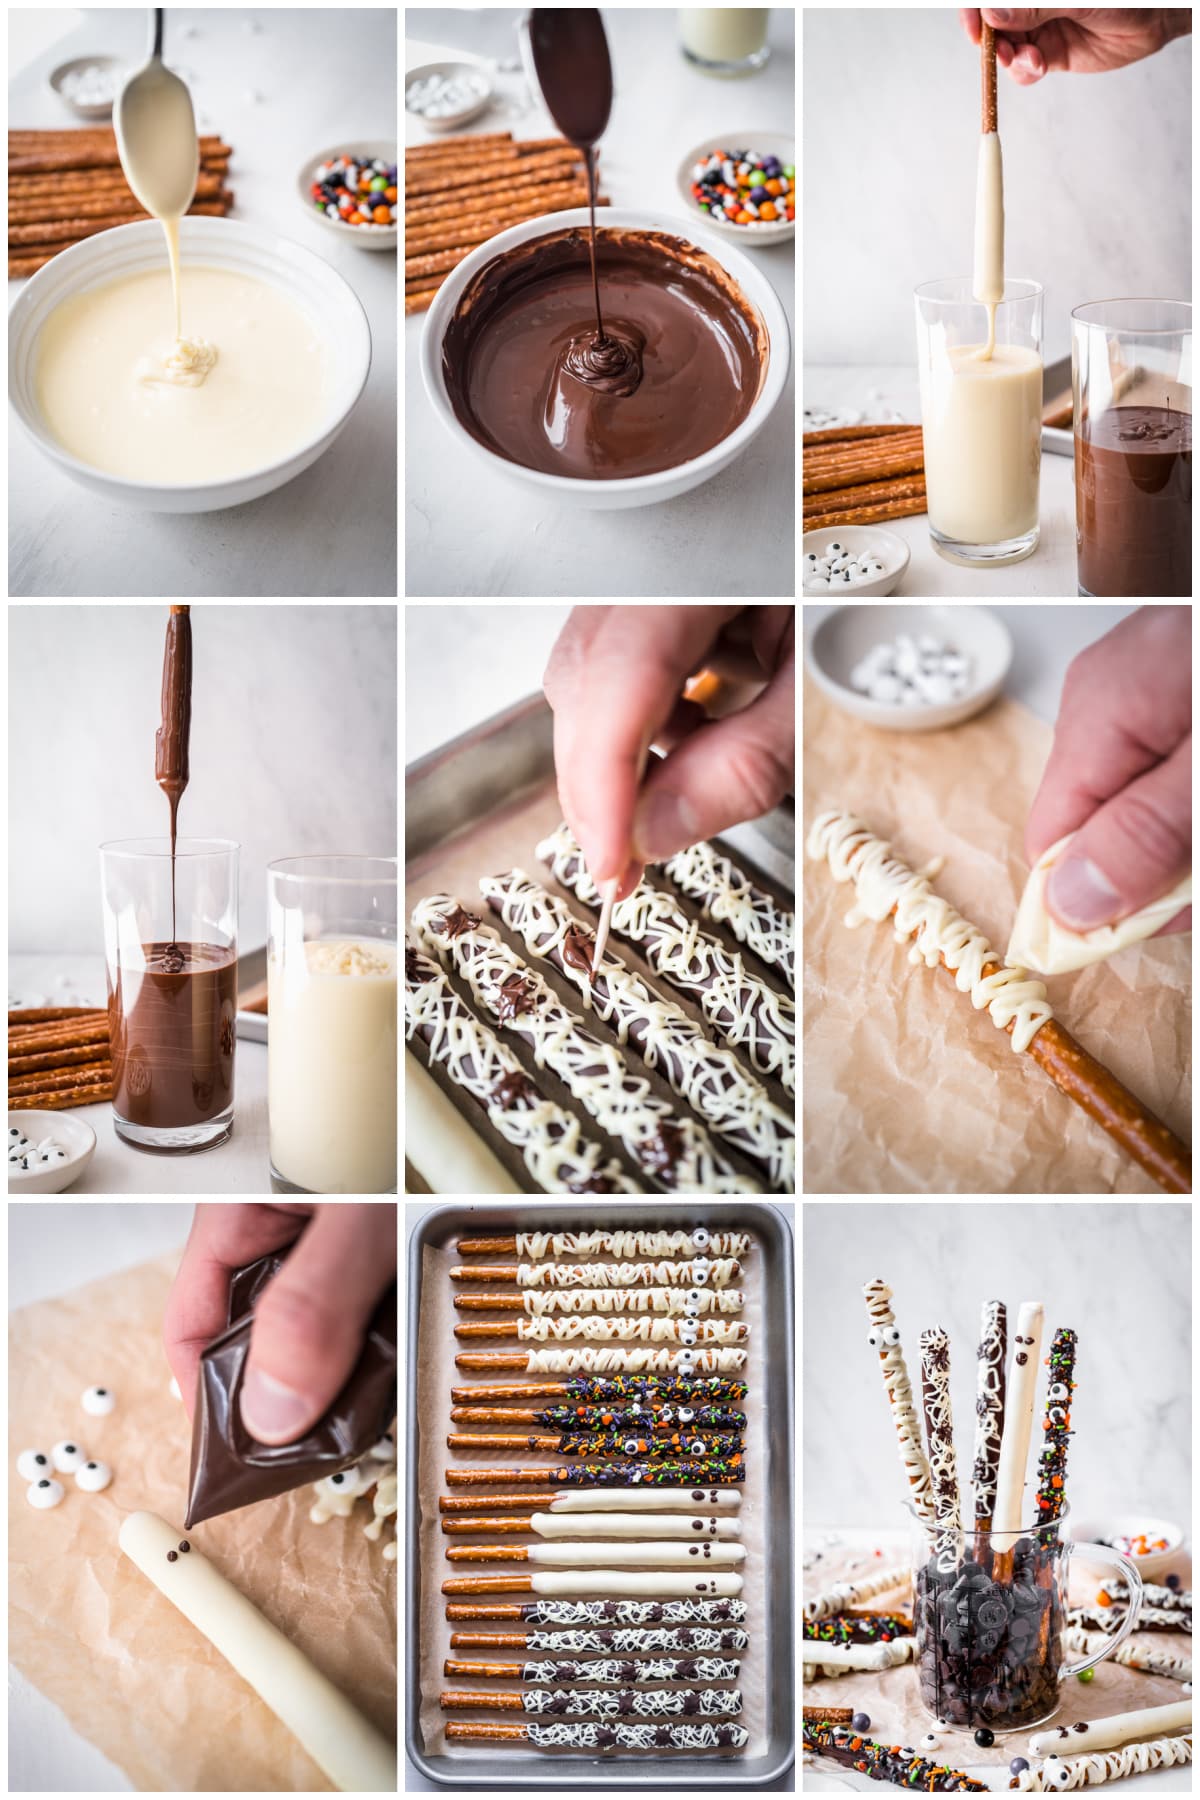 Step by step photos on how to make Halloween Chocolate Pretzel Rods.